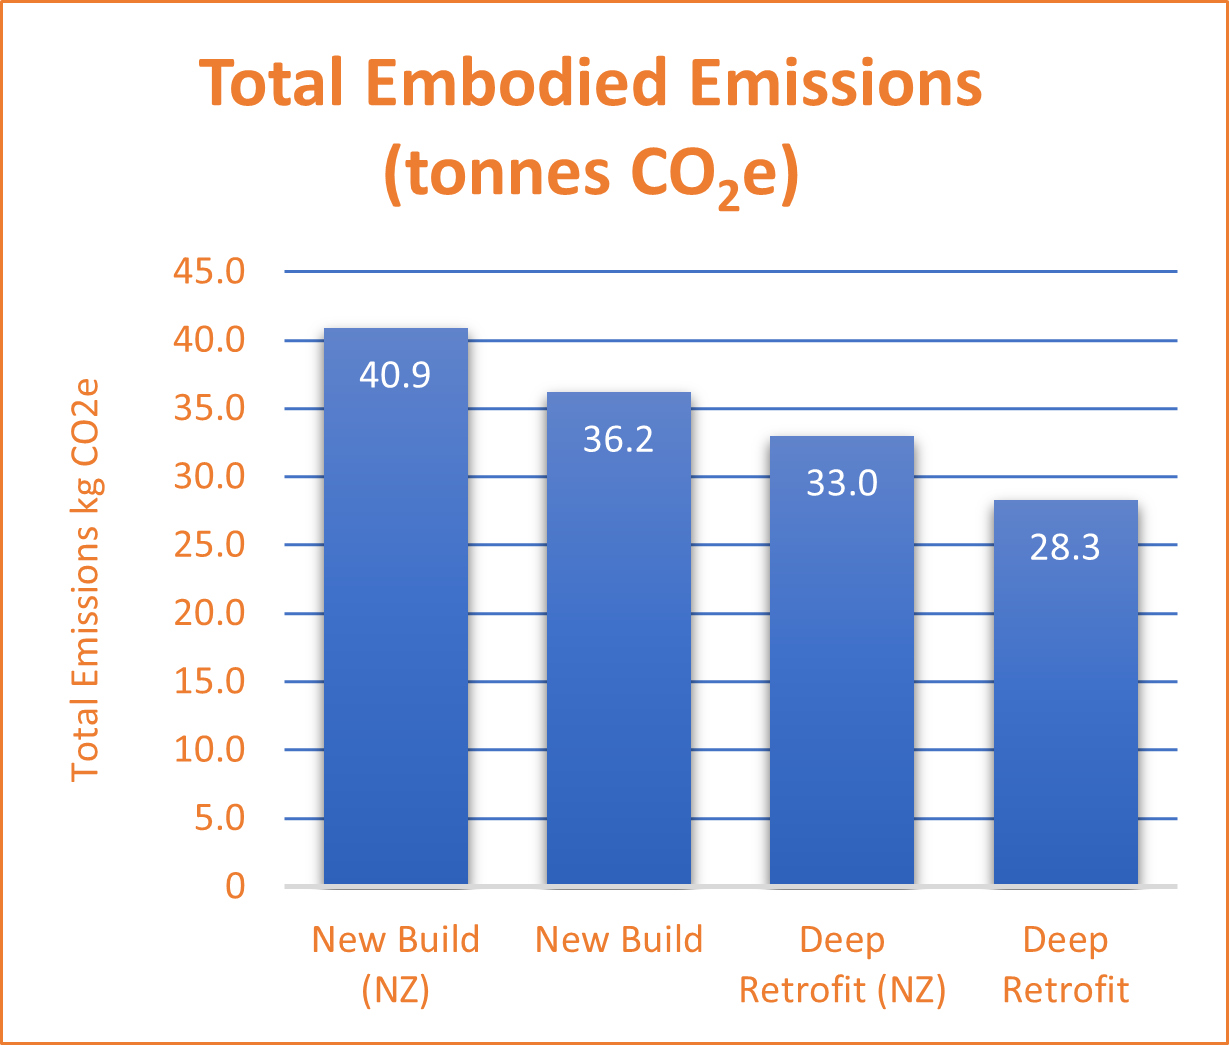 Figure 2. Total Embodied Emissions